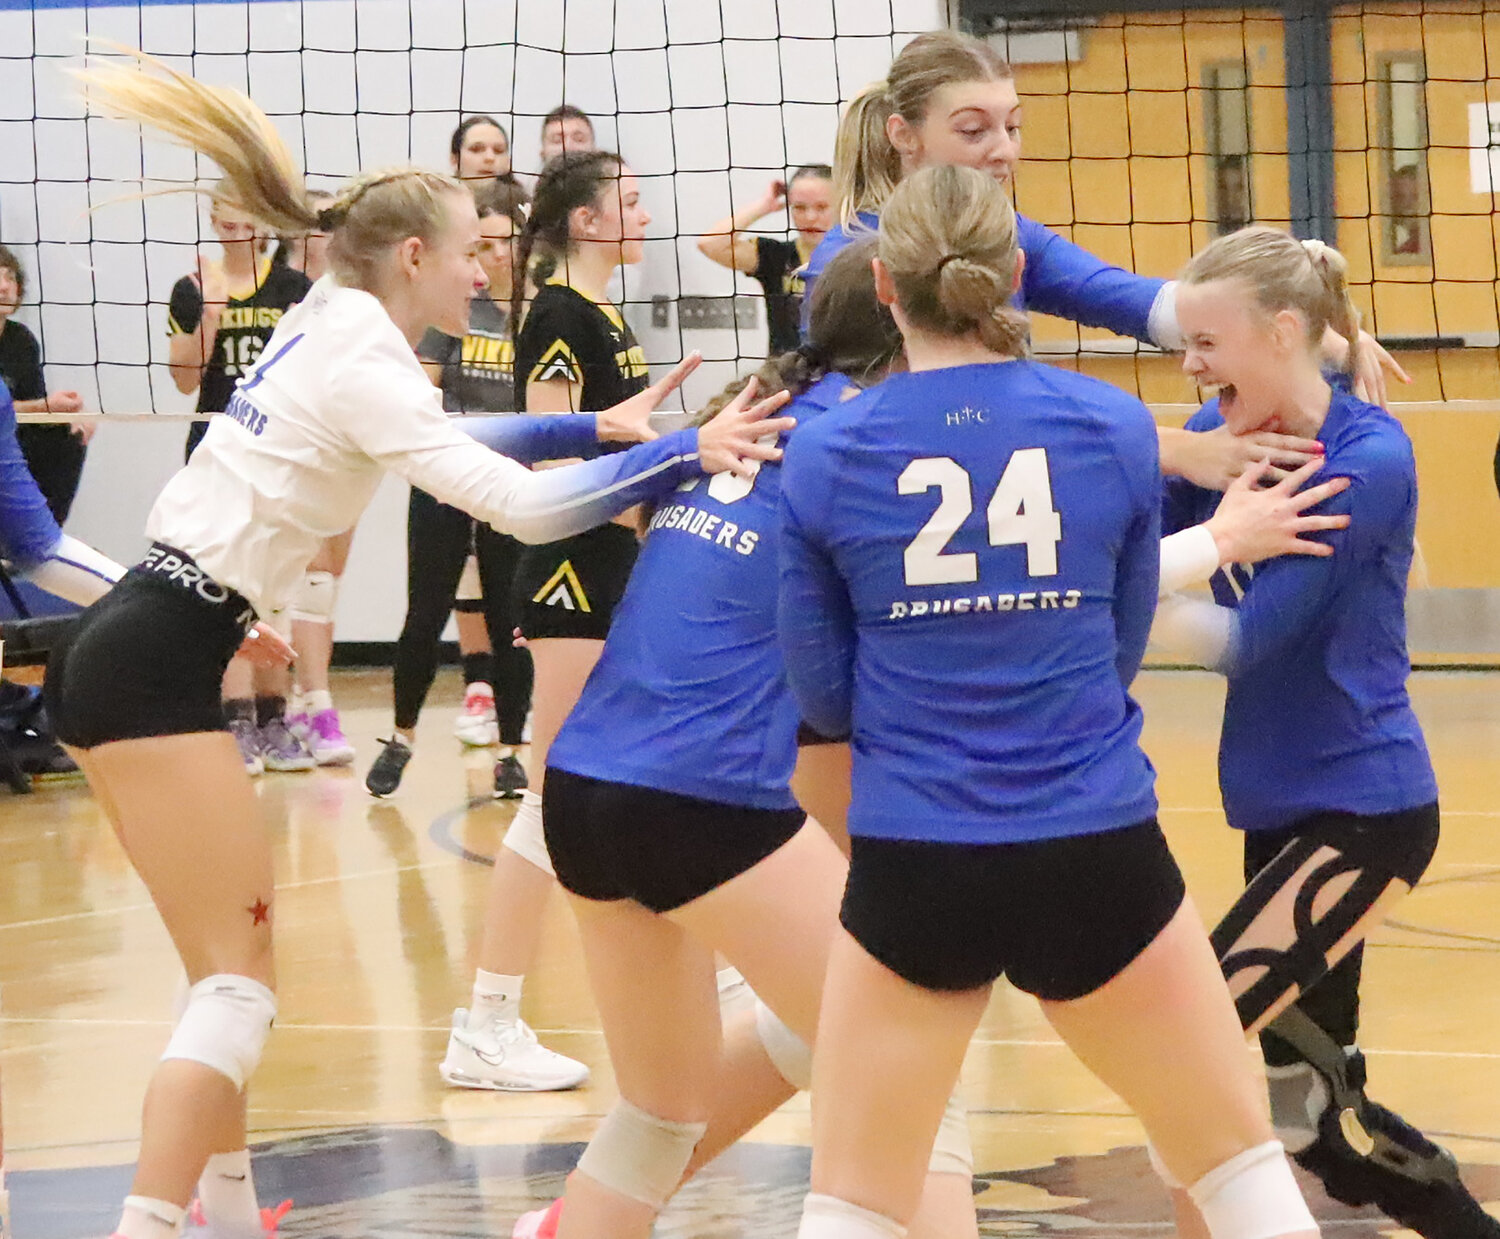 The HTC Crusaders 'gently' celebrate with senior Natalie Randolph after her kill sealed the win over Edgewood-Colesburg to advance to the state volleyball championships Tuesday night in Coralville. Randolph has been battling knee pain all season after missing last season with a surgical repair.